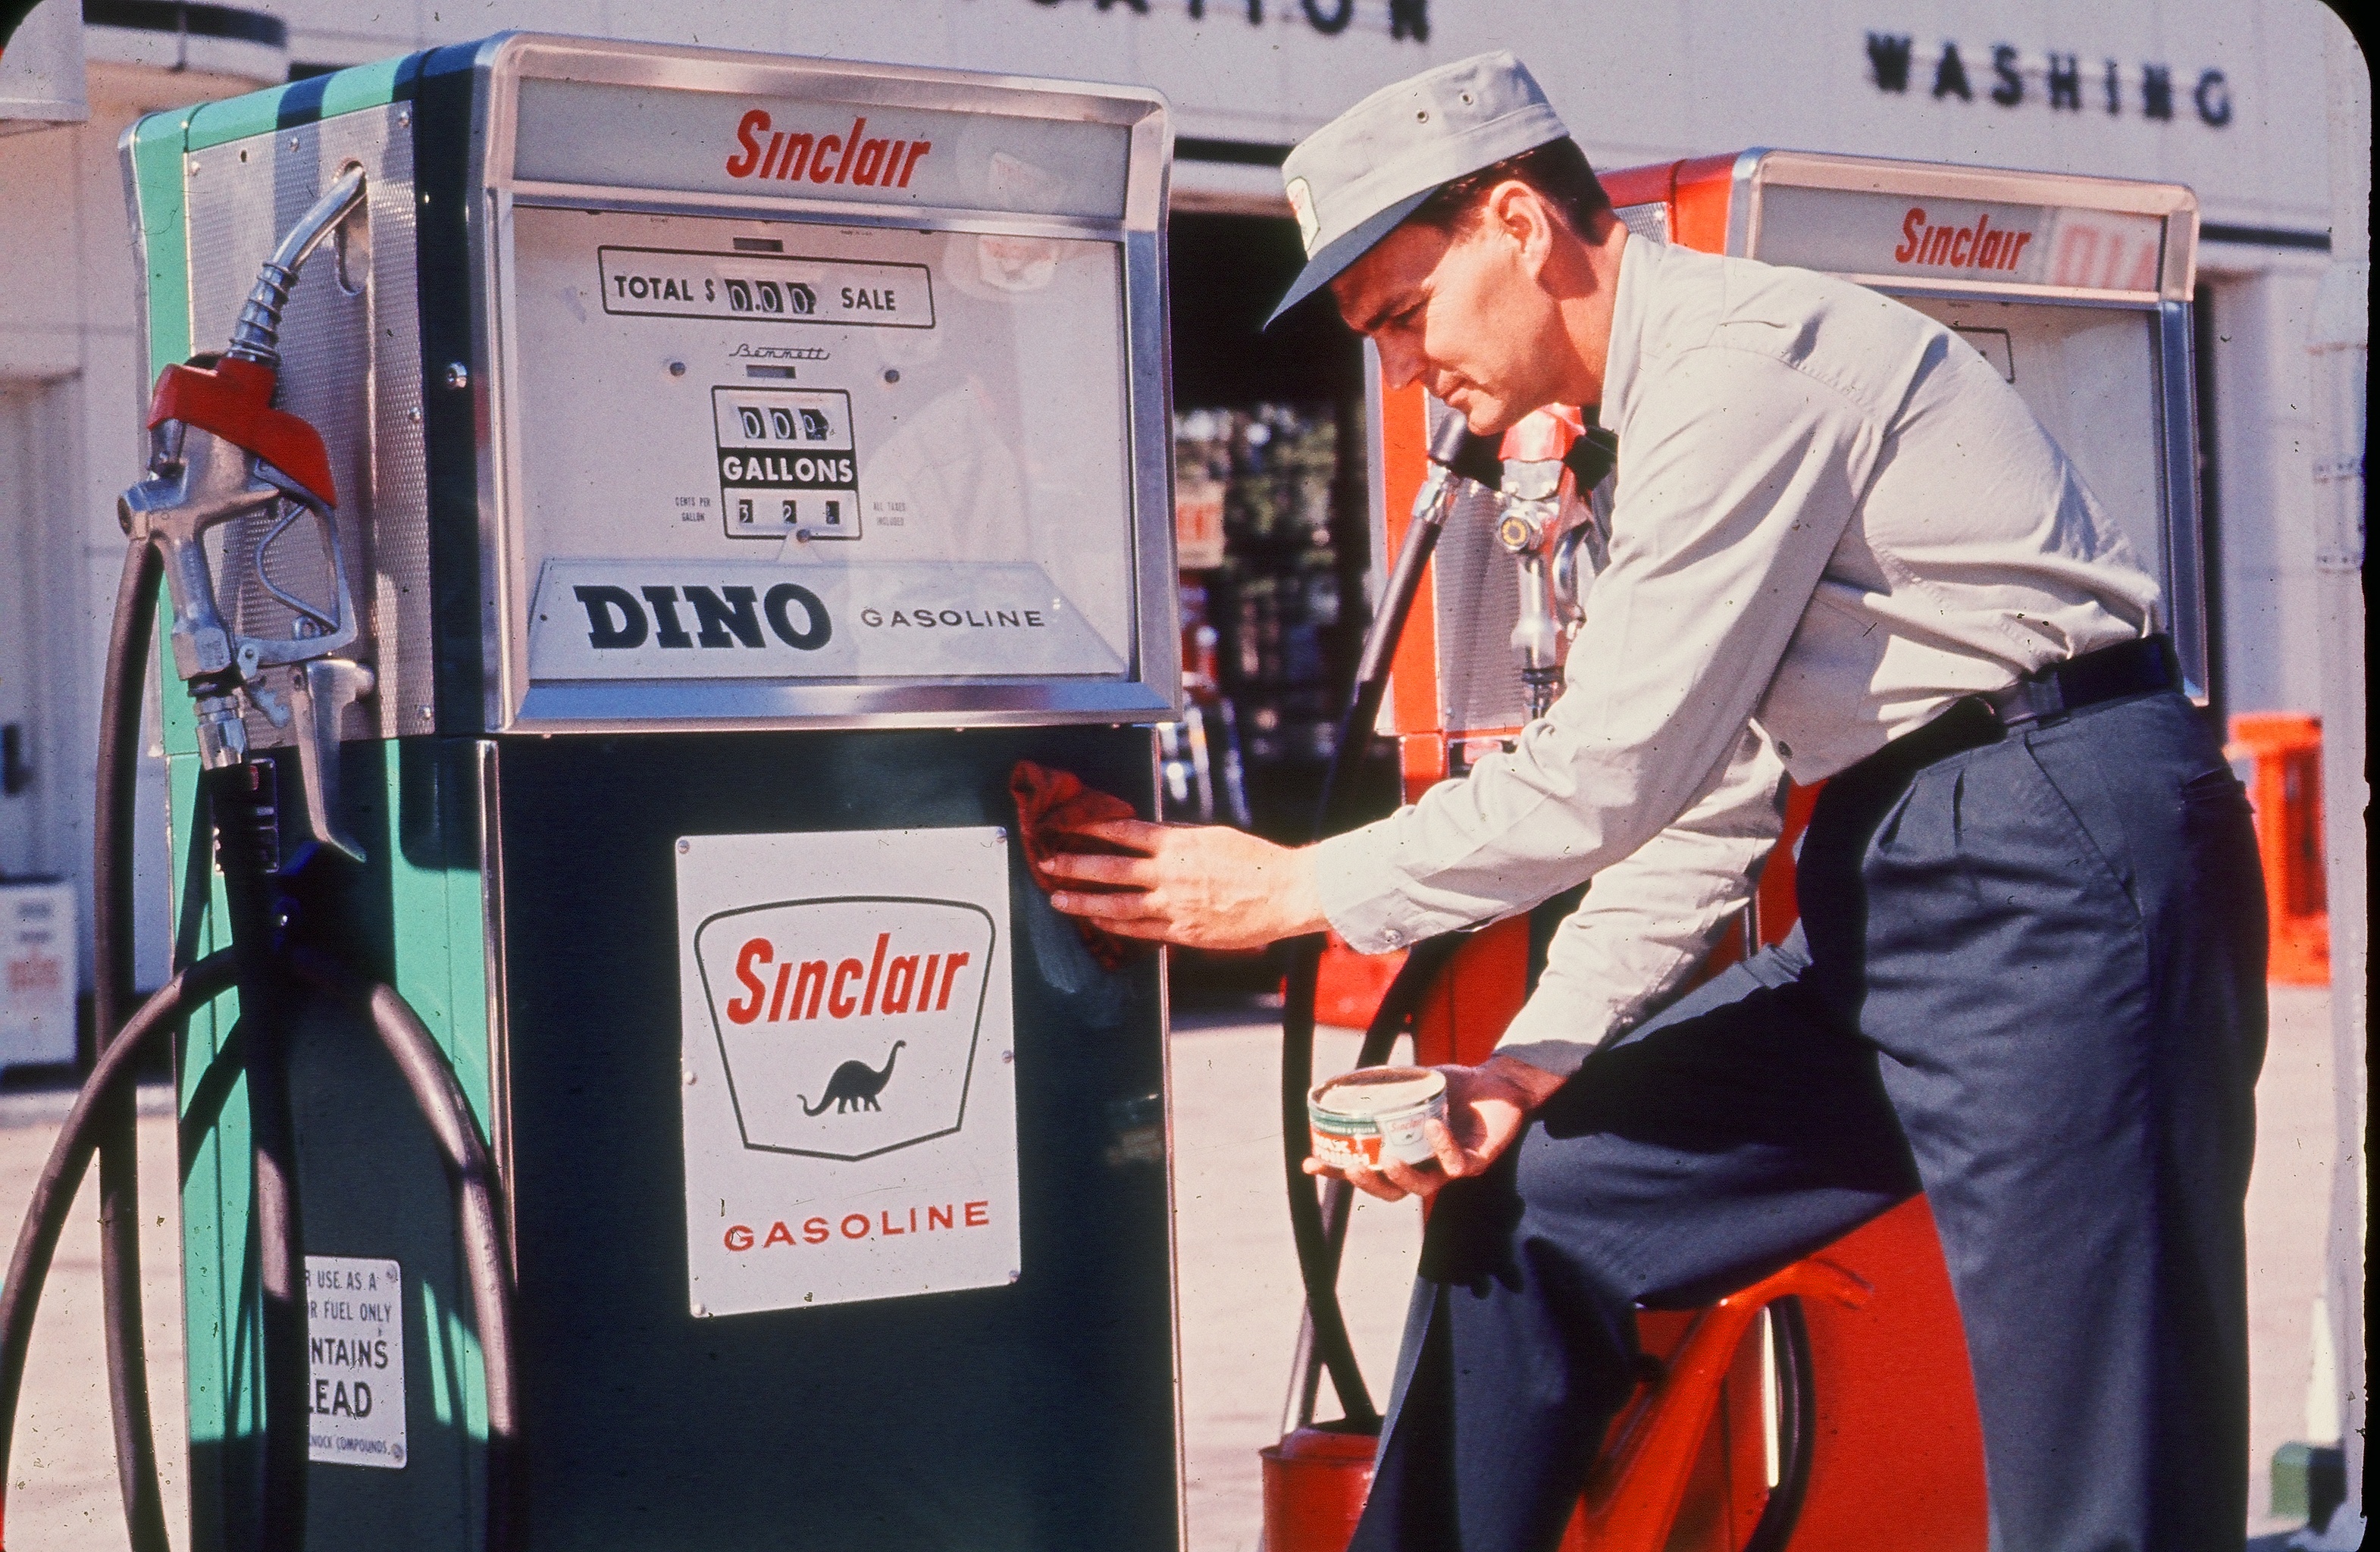 Sinclair oil gas station attendant cleaning a gas pump